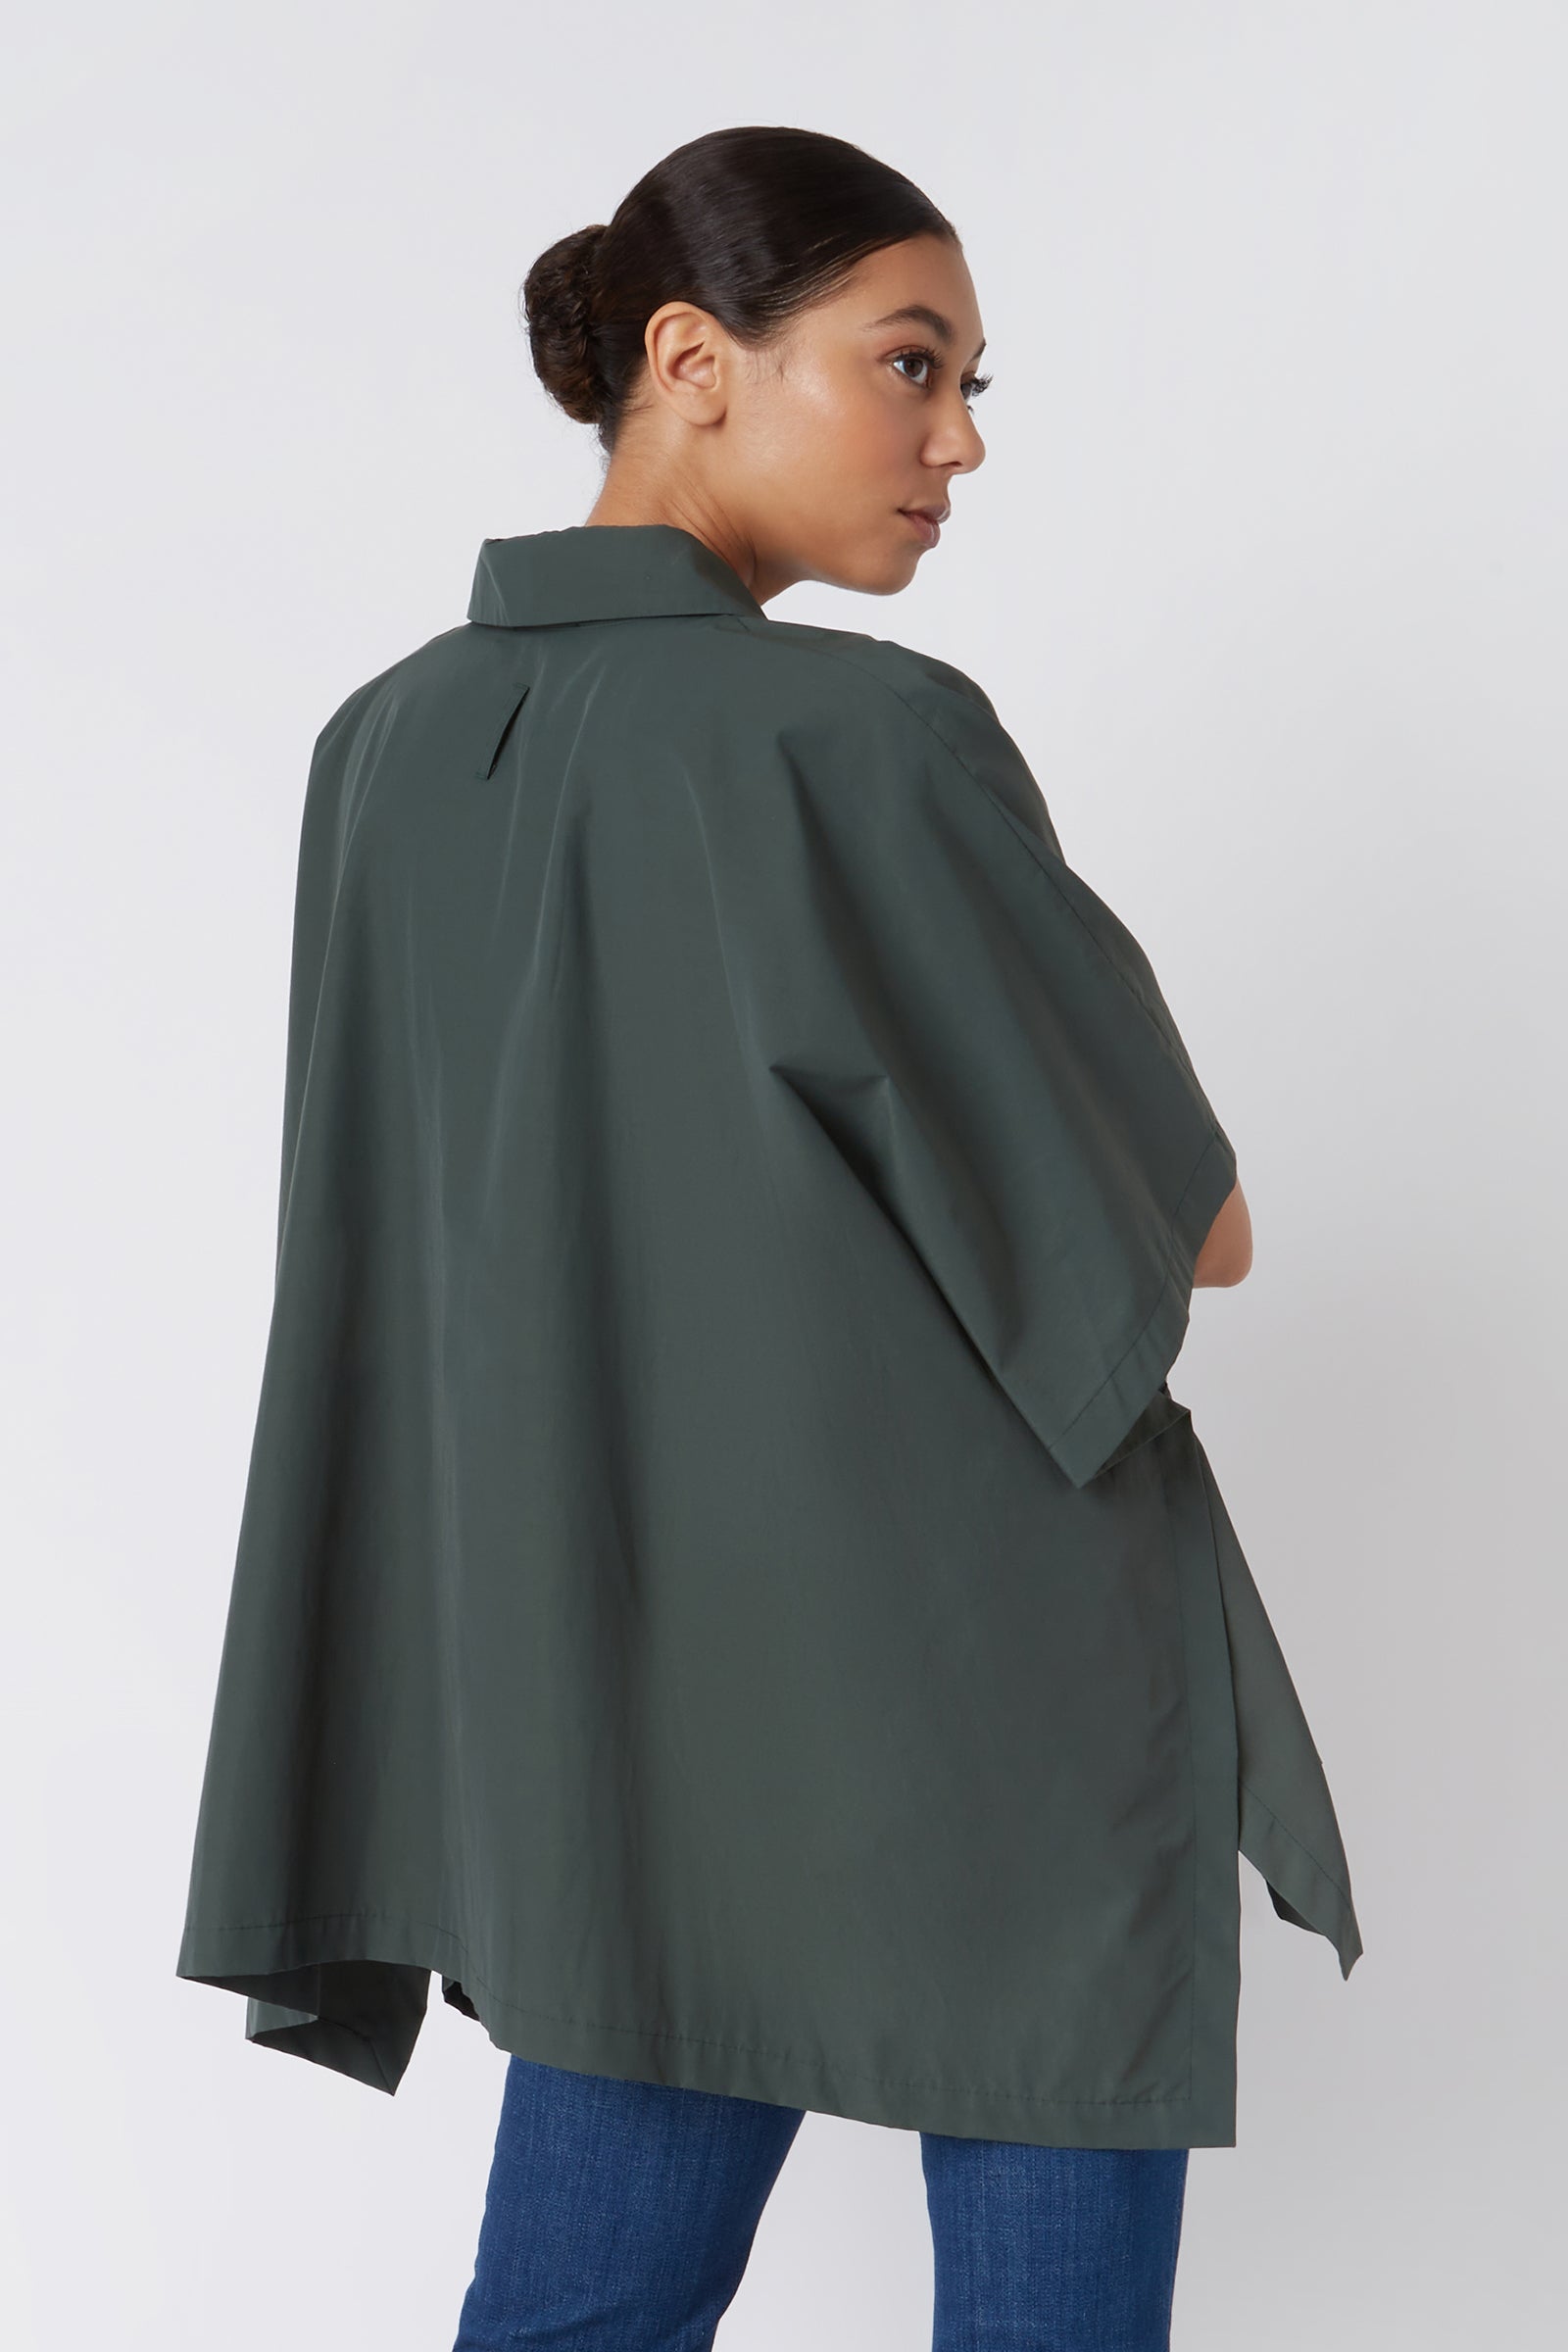 Kal Rieman Pocket Poncho in Loden on Model Cropped Back View